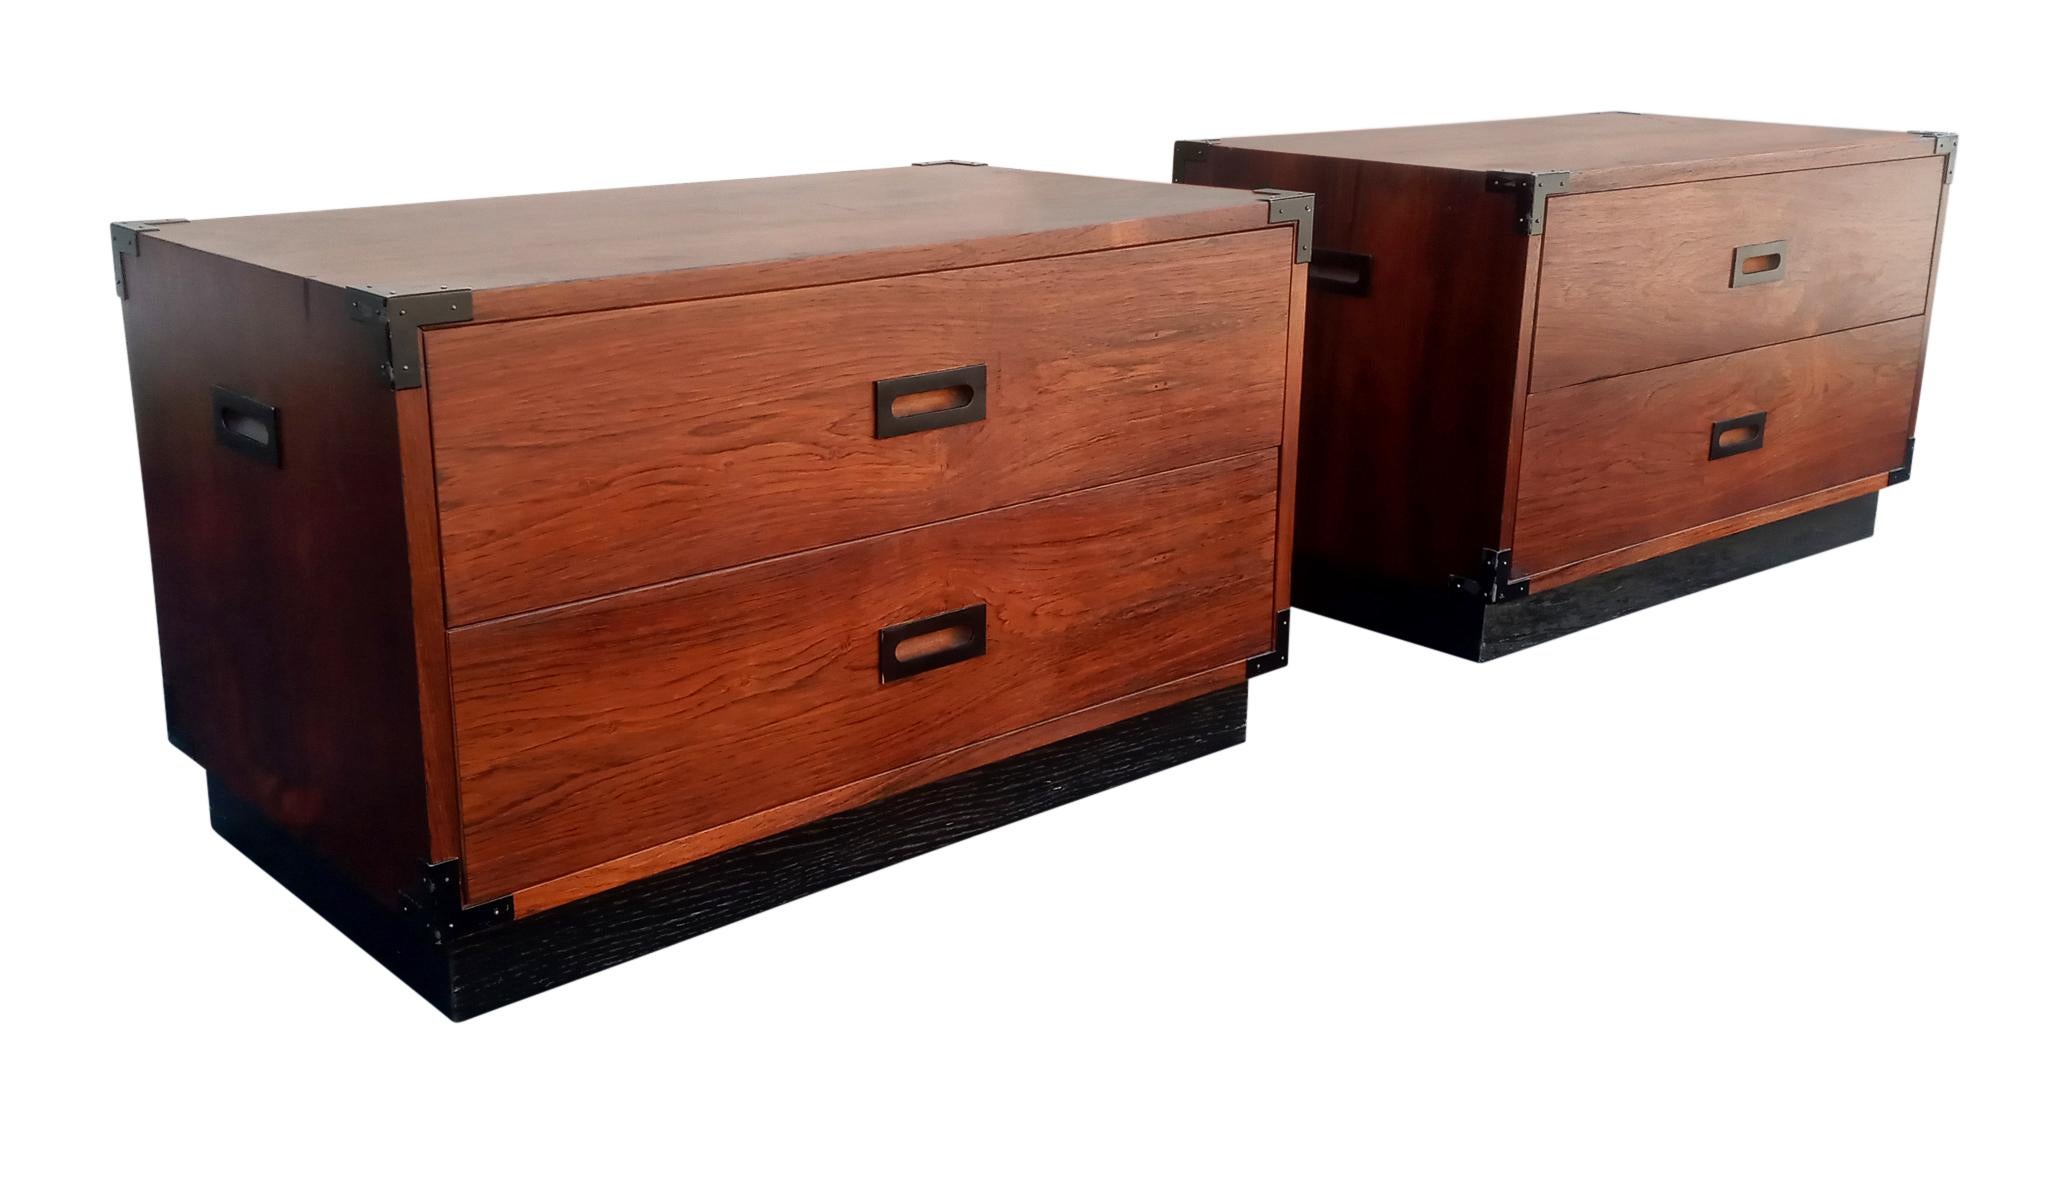 This is a fine well-made hefty pair of rosewood two-drawer nightstands, end-tables or lamp-tables. The grain is nicely figured with rich rosewood tones and a warm aged patina. The handles and corner mounts are enameled steel. The scale, proportions,